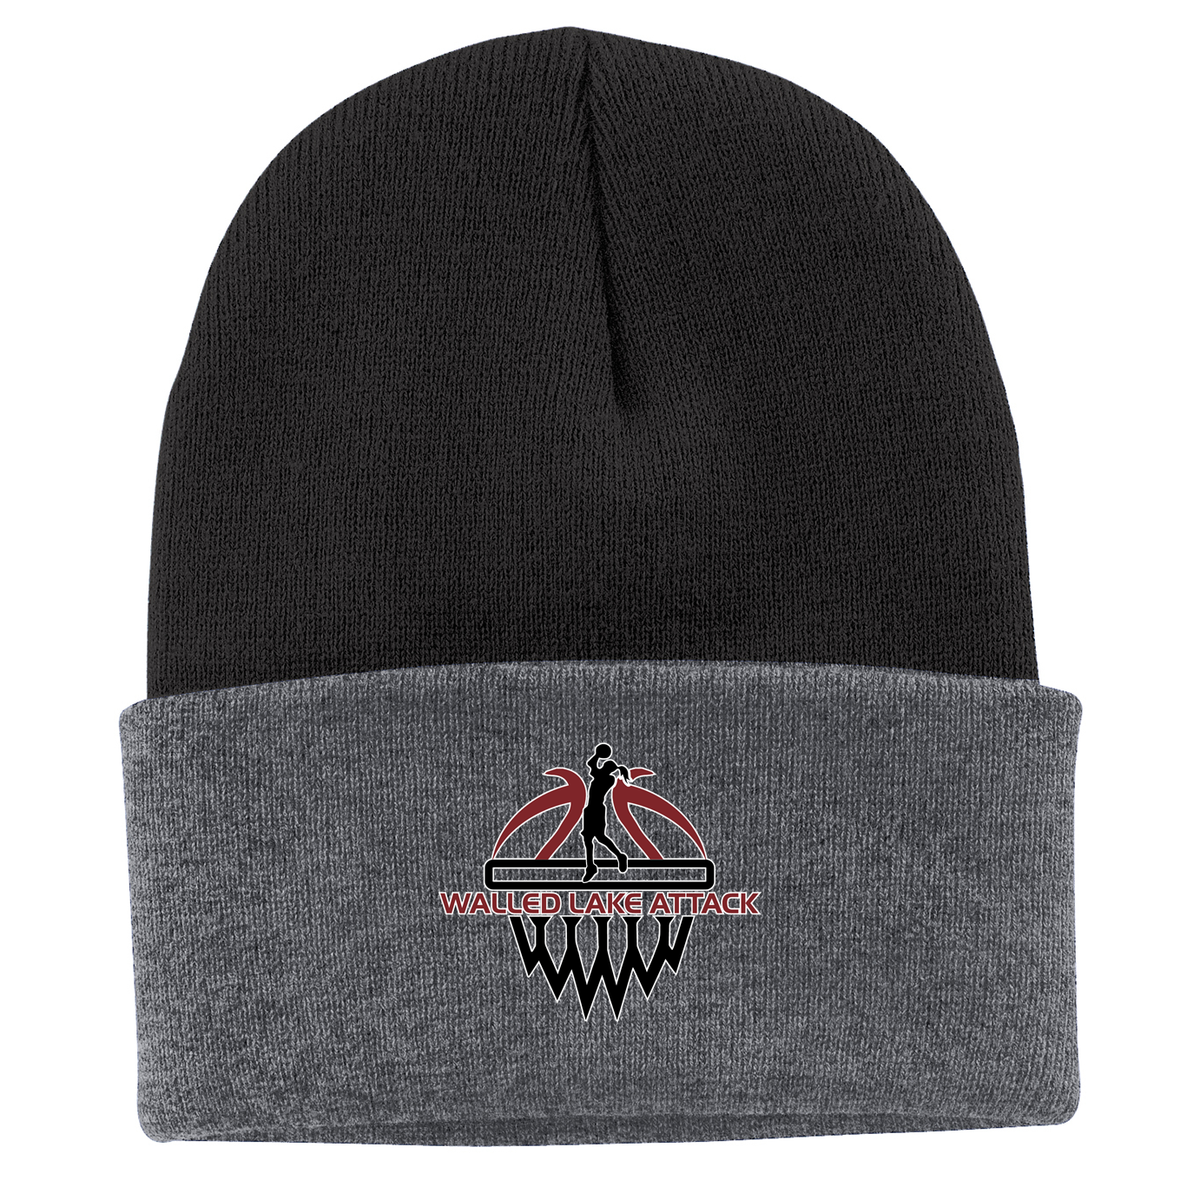 Walled Lake Attack Basketball Knit Beanie